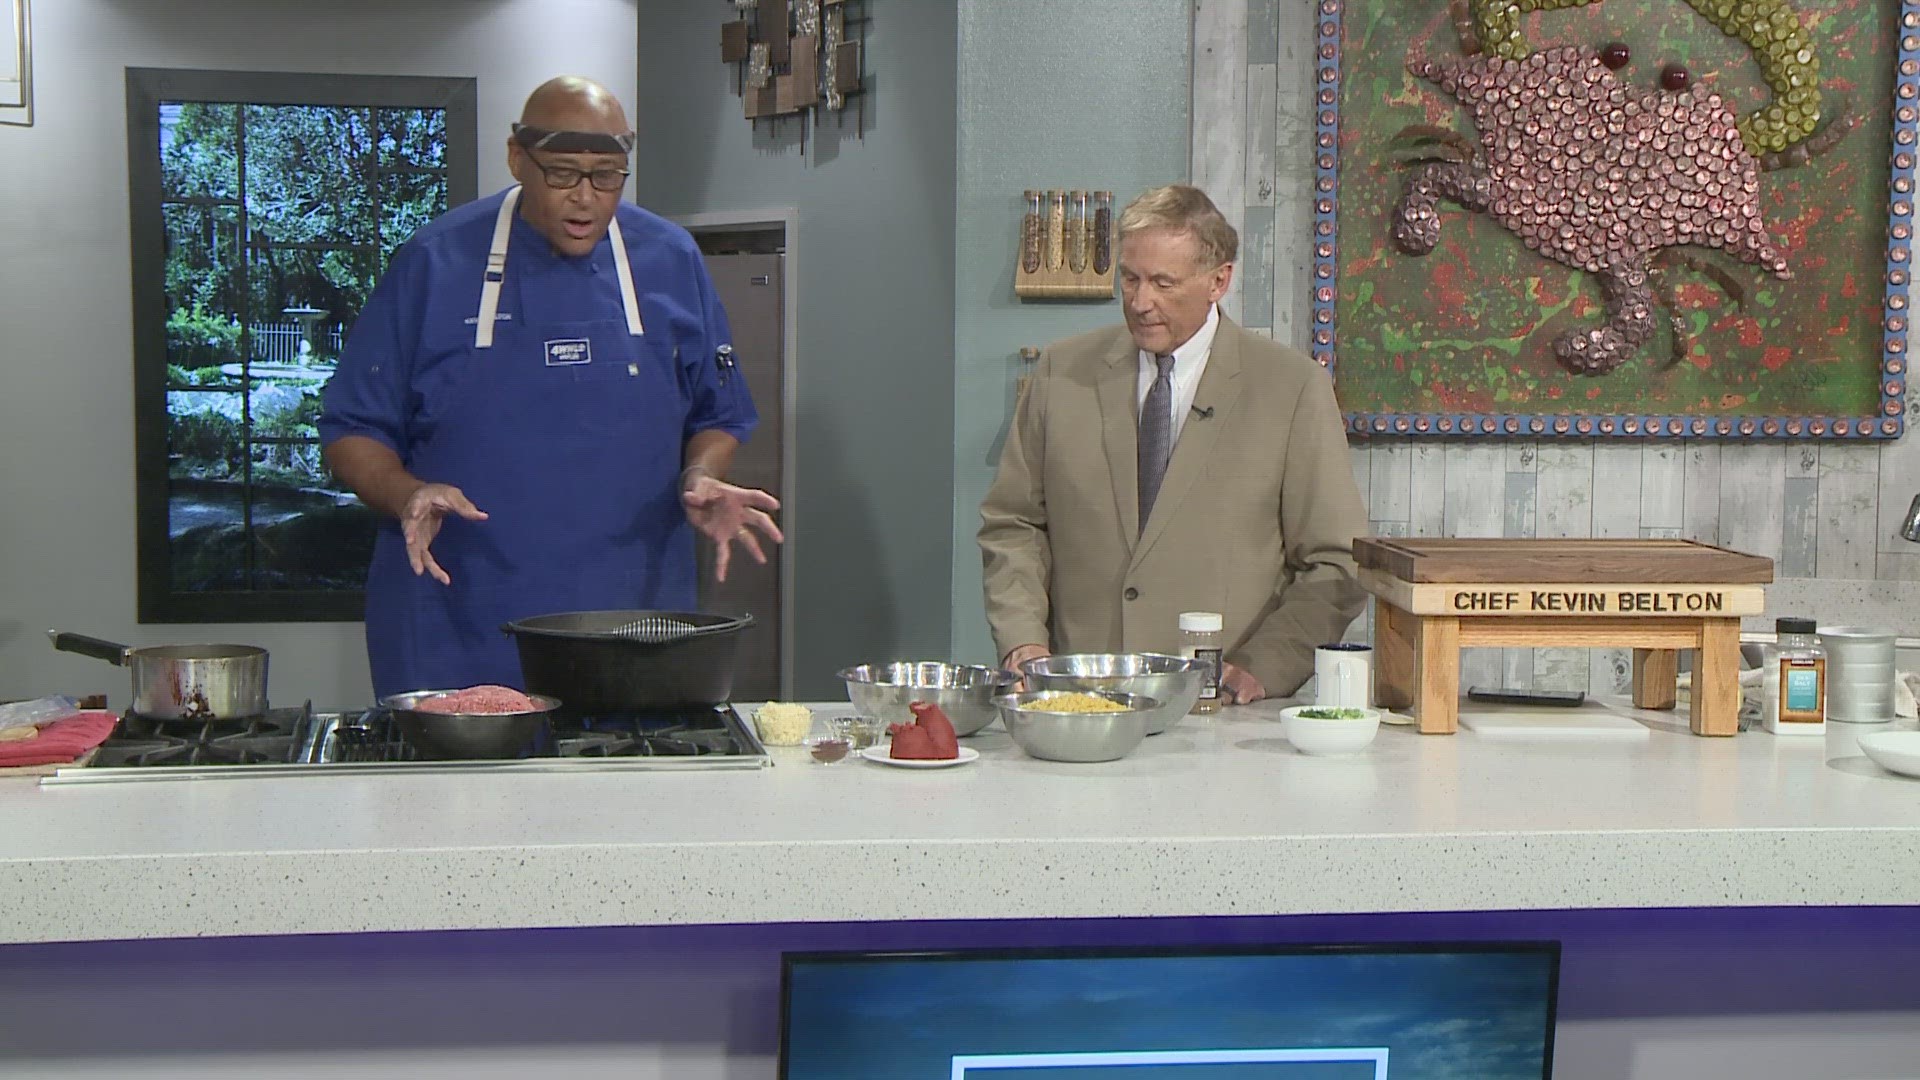 Chef Kevin Belton cooking it up in the WWLTV kitchen.